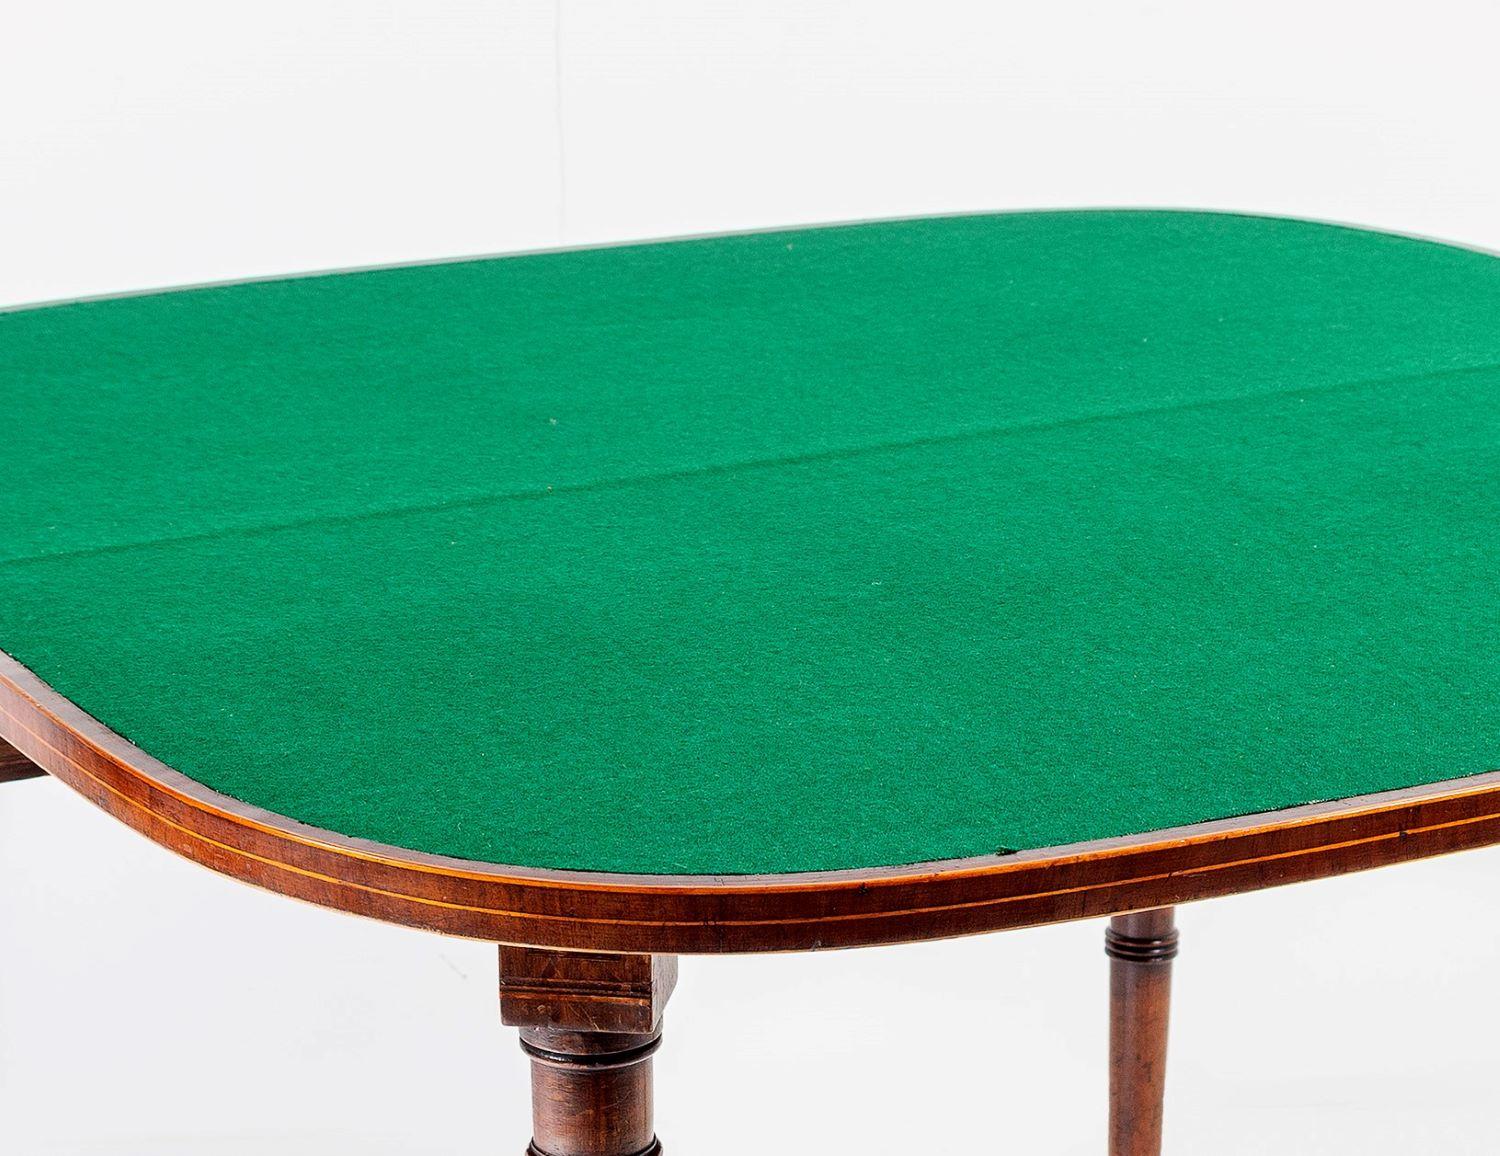 Joinery 19thC George III Mahogany Fiddle Back Folding Card Table with Green Baize Top